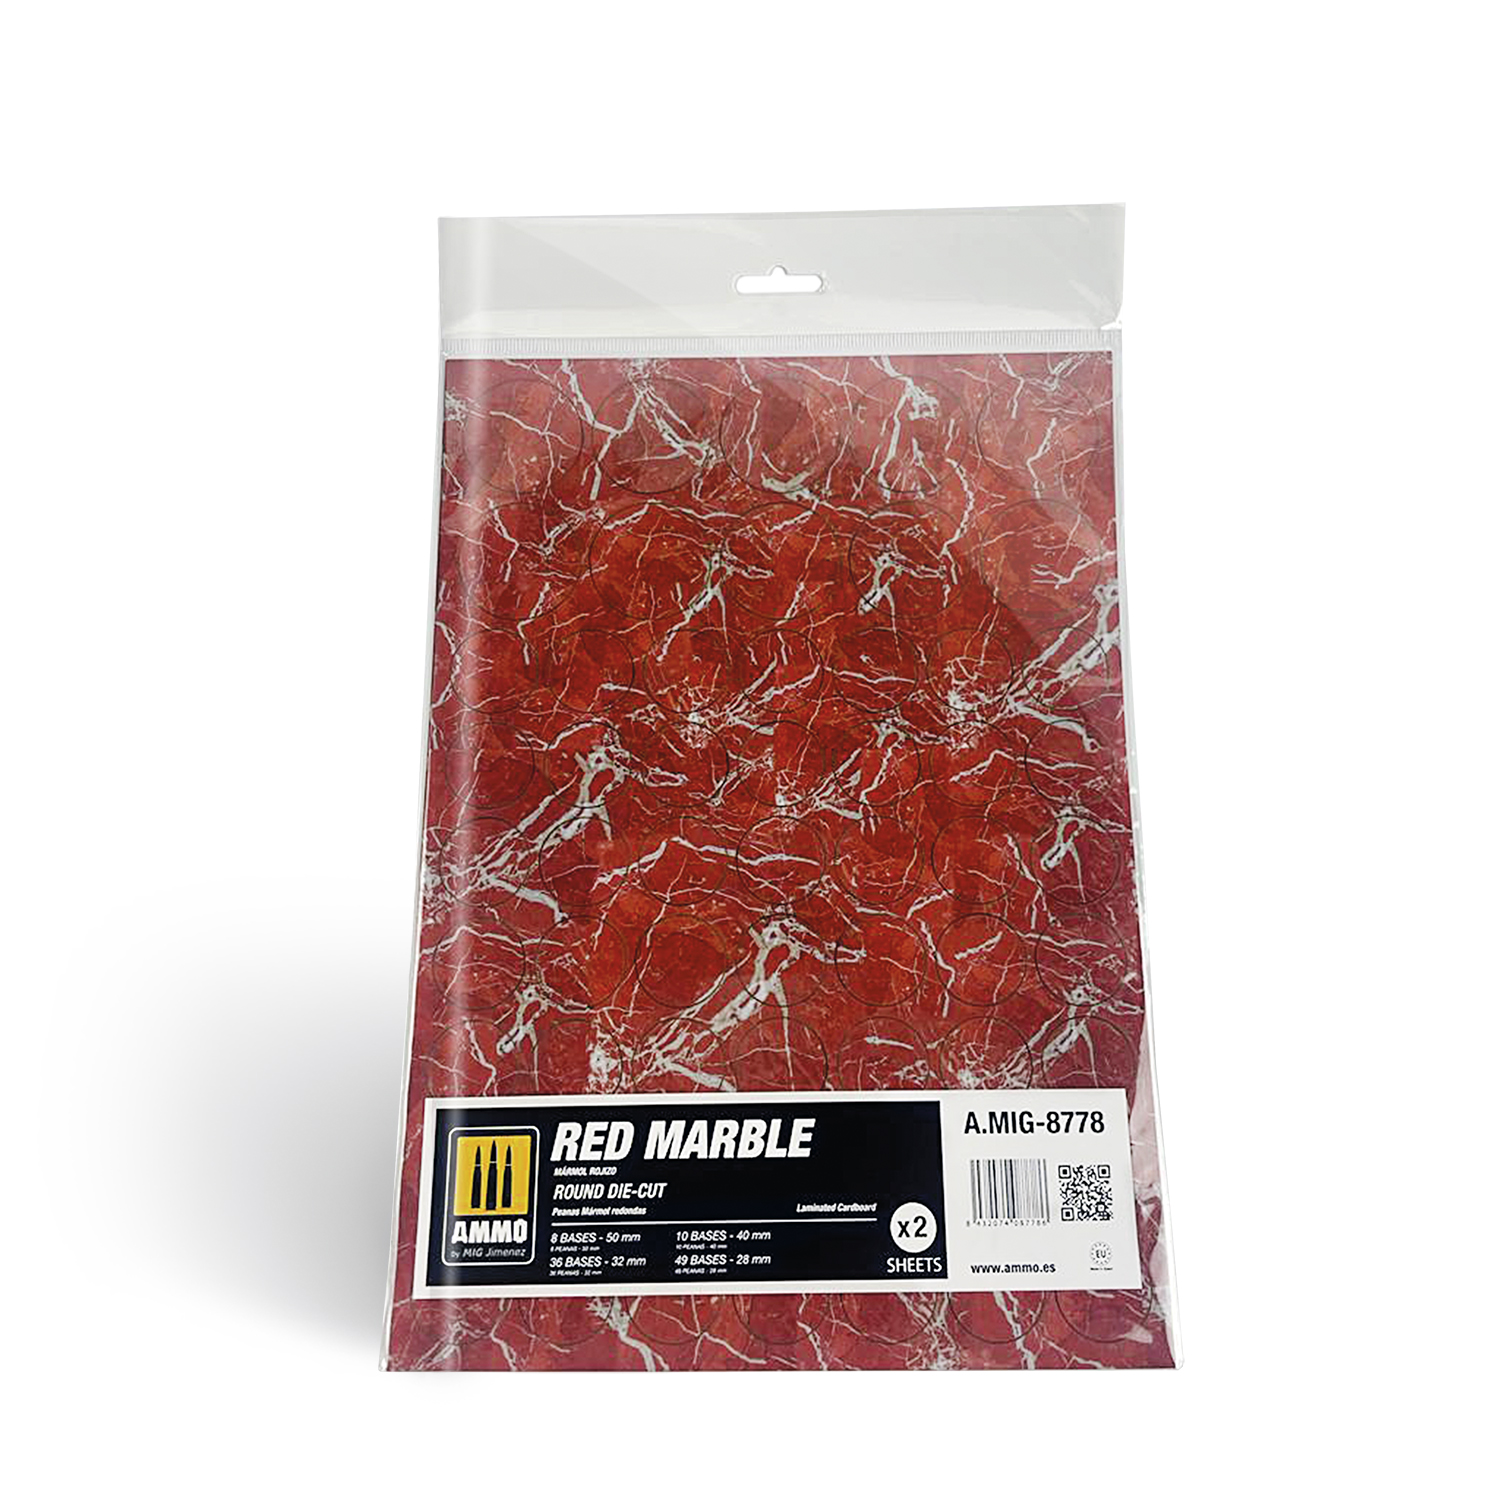 MIG8778 Red Marble. Round die-cut for Bases for Wargames